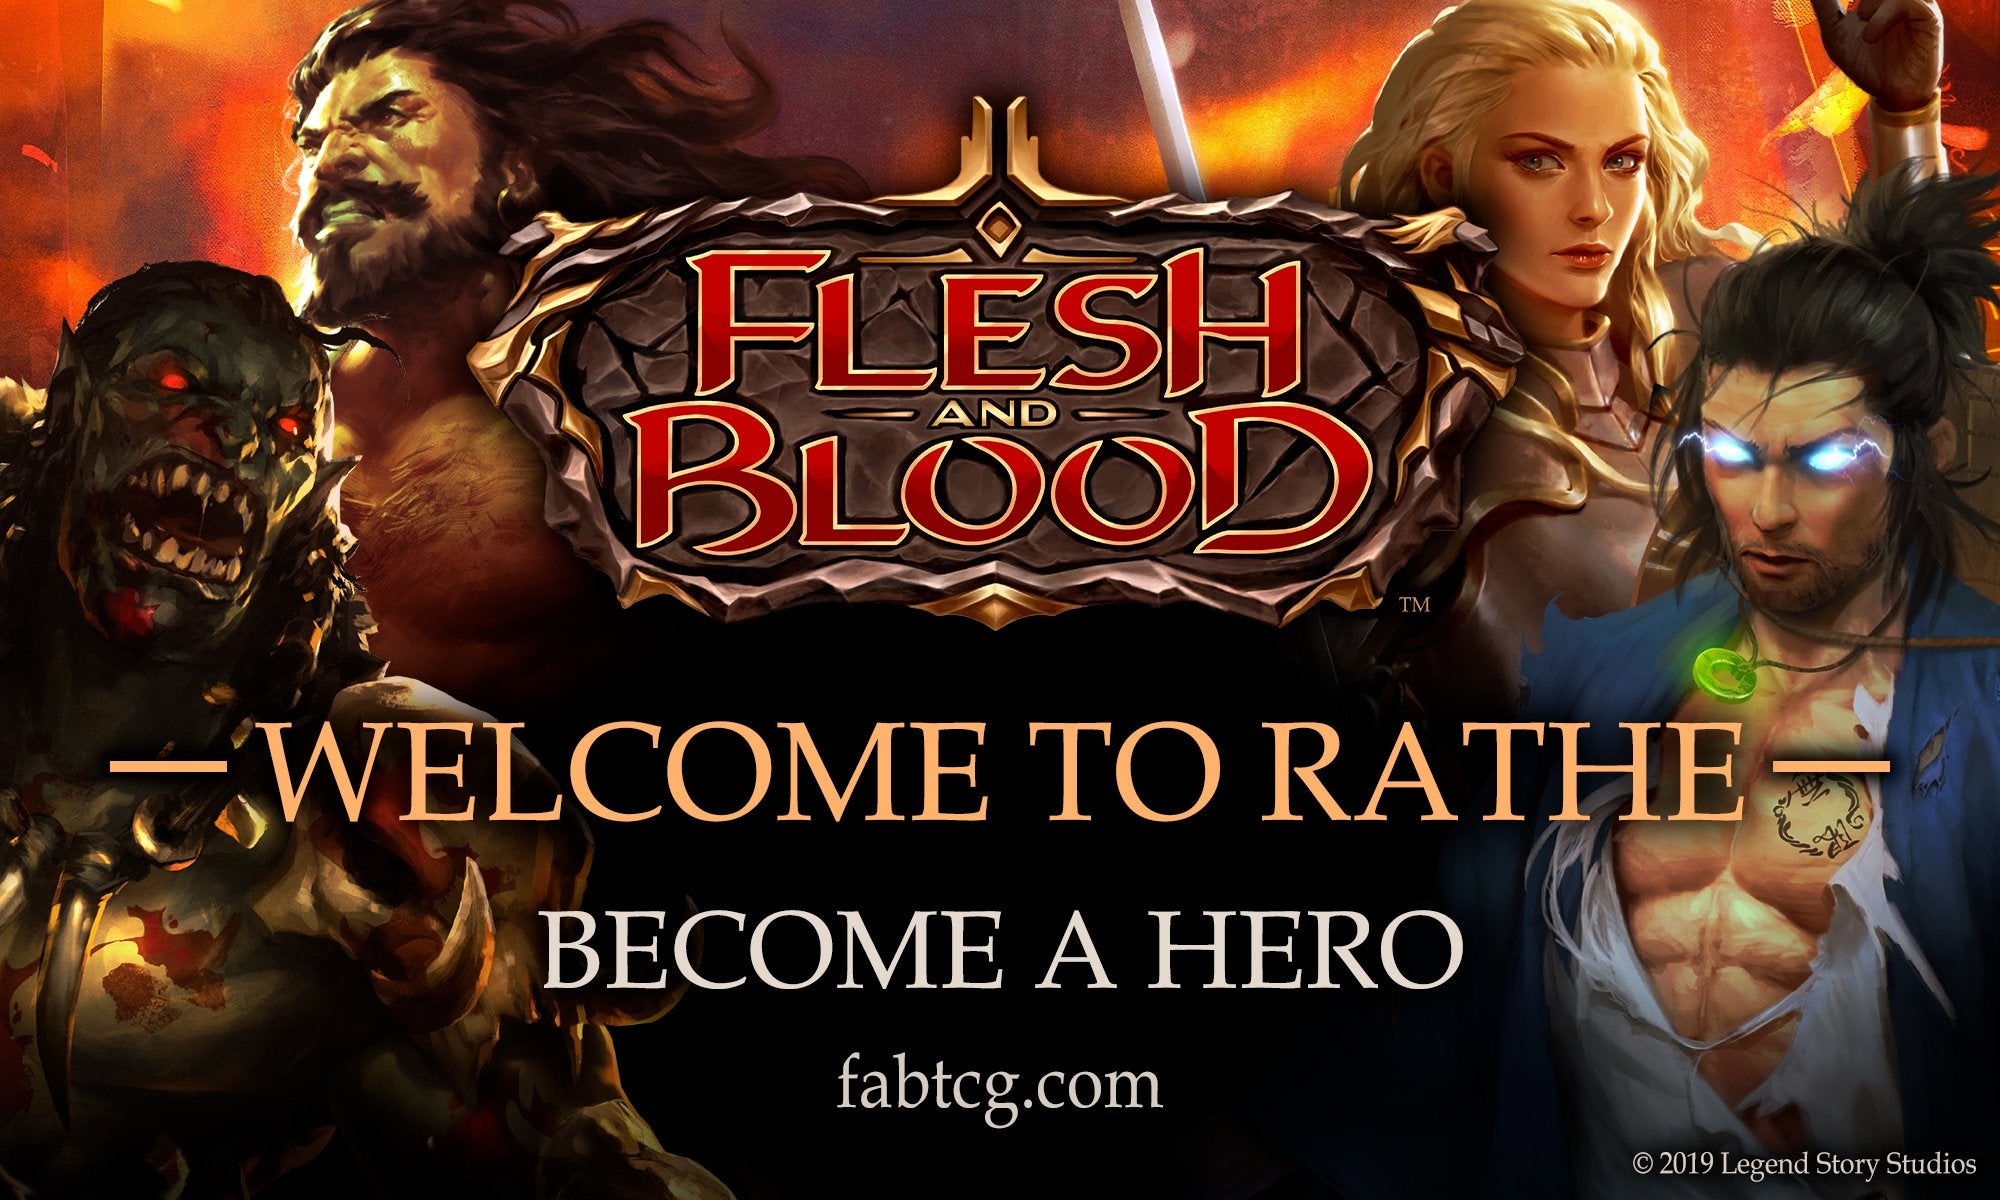 Flesh And Blood - Welcome To Rathe (UNLIMITED) - Boîte Booster (24 Paquets)